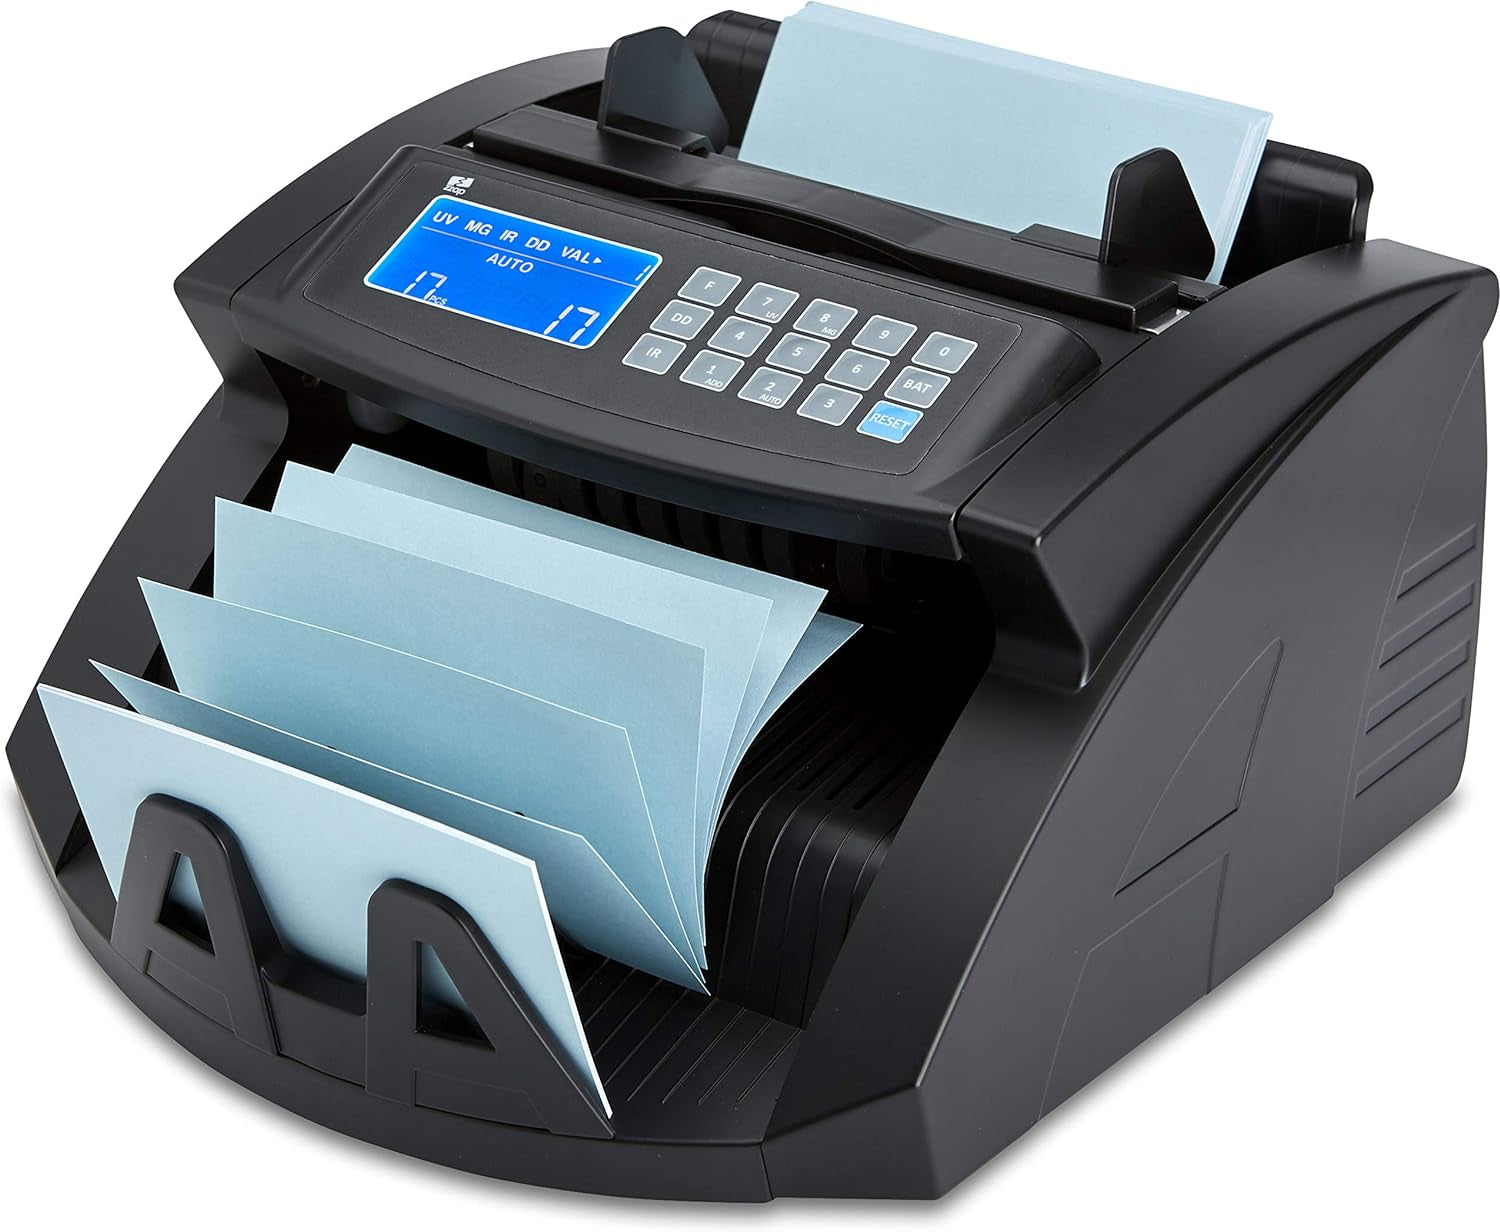 Bill Value Counter & Counterfeit Detector - Money Cash Currency Machine (Nc20I)